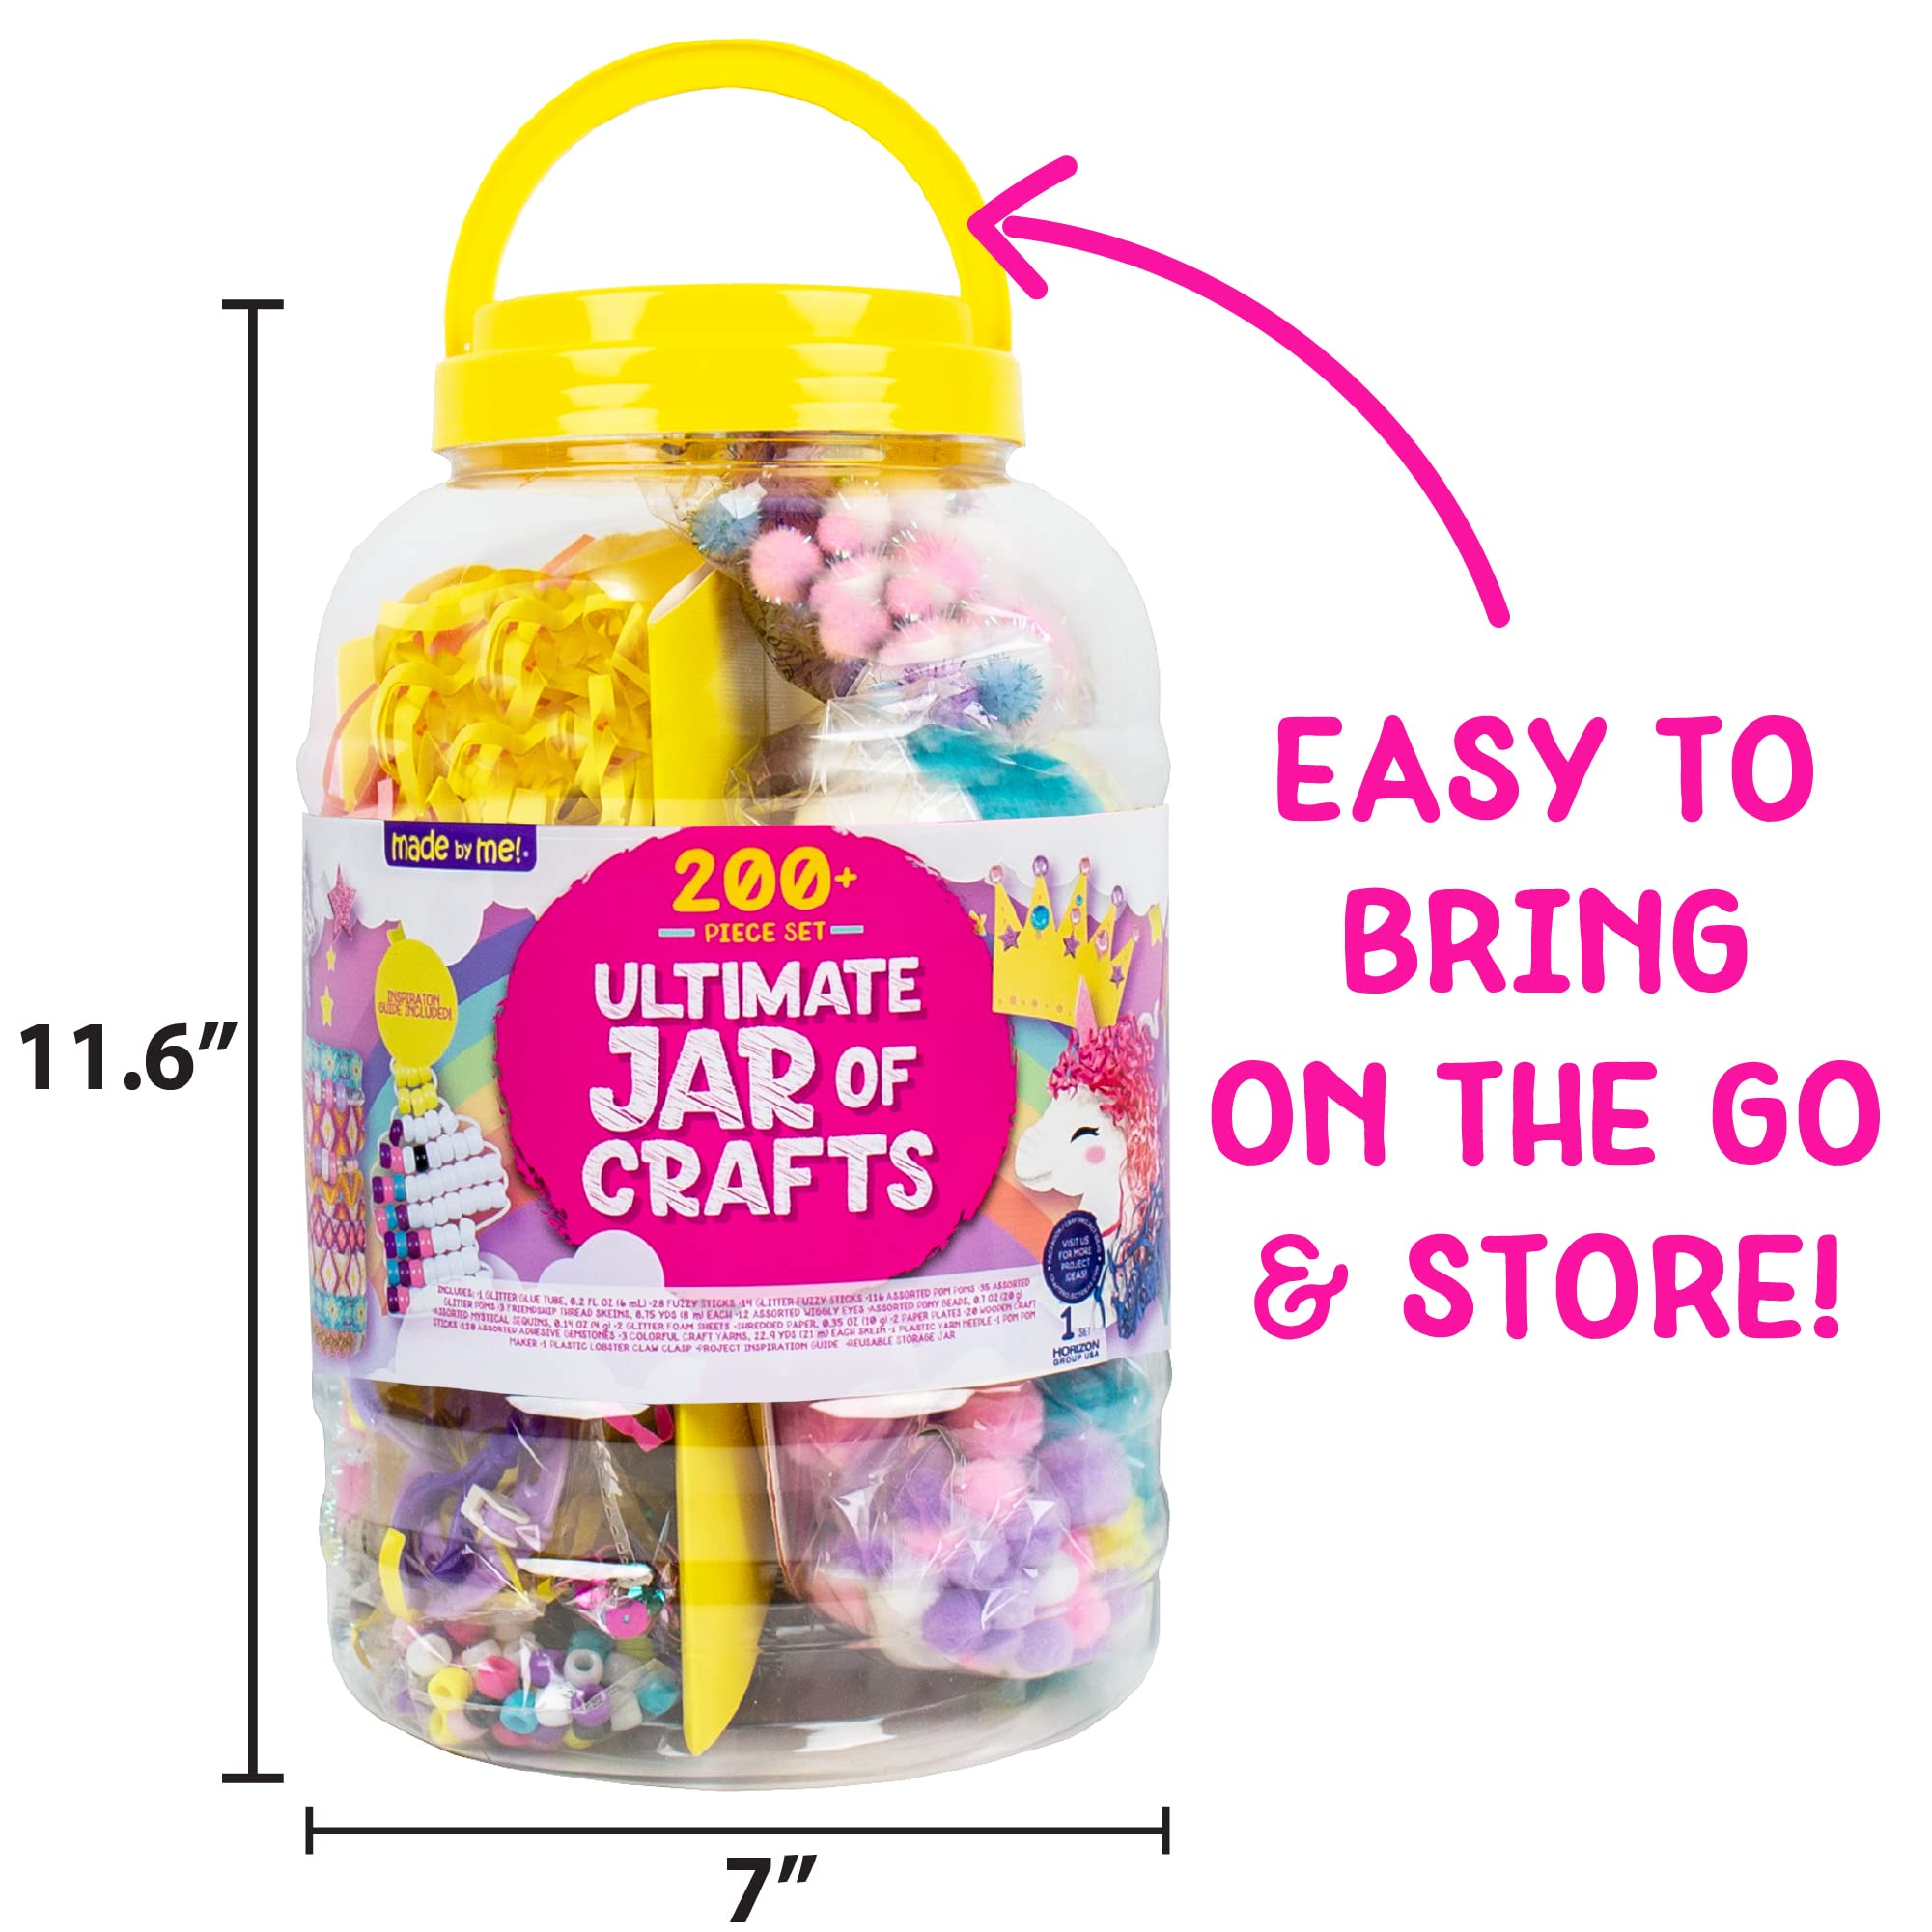 Made By Me! Ultimate Jar of Crafts, 200+ Piece Mystical Craft Supply Bundle, Craft Supplies Starter Kit, Great Arts & Crafts Kit for Travel and On-The-Go, Perfect for Kids and Adults Ages 6+